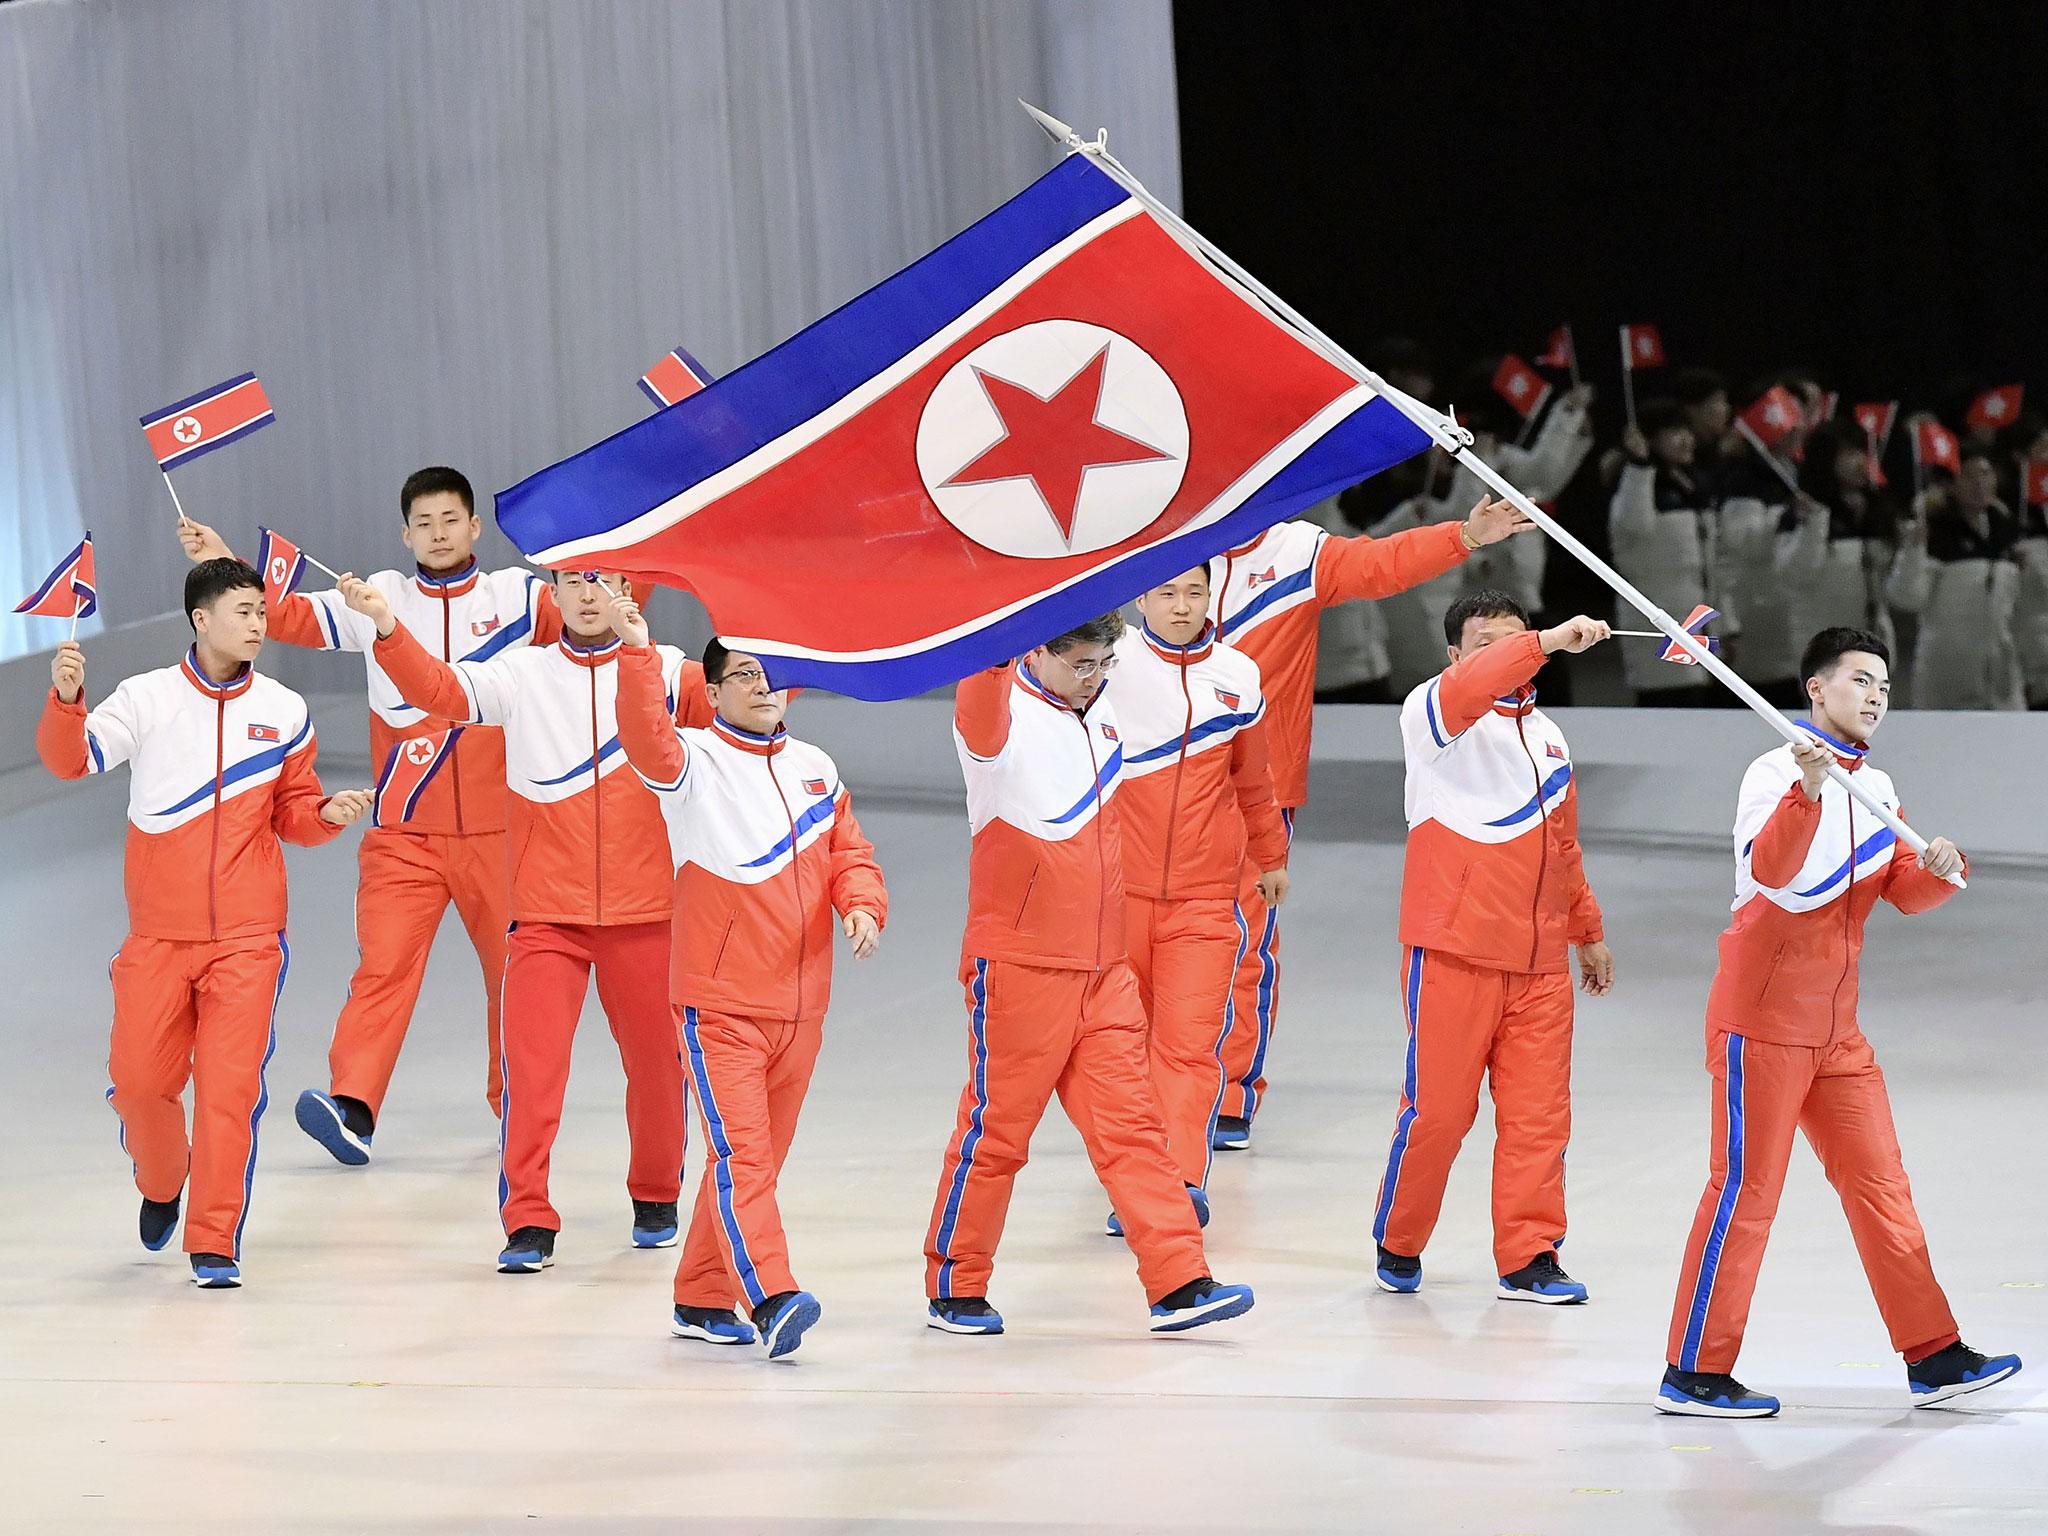 The North Korean Winter Olympics delegation will include 24 coaches and officials